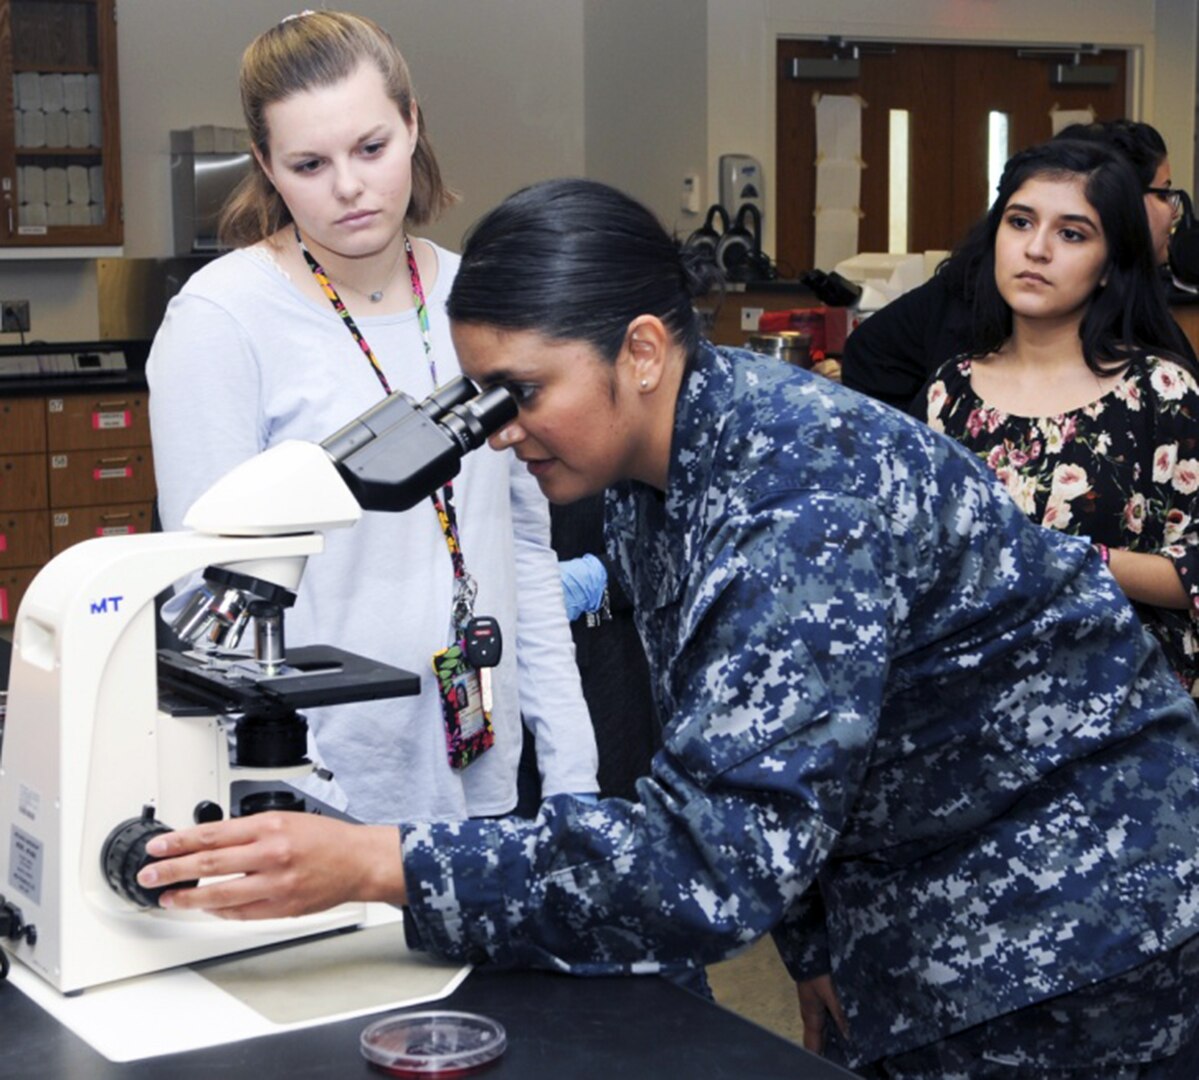 Petty Officer 1st Class Elizabeth Sifuentes, a medical laboratory technician instructor at the Medical Education and Training Campus, adjusts a microscope for students from John Marshall High School to show them different organisms medical lab technicians work with during a tour of METC at Joint Base San Antonio-Fort Sam Houston March 2. The tour was conducted by METC's Navy service component, Navy Medicine Training Support Center, as part of their Science, Technology, Engineering and Mathematics, or STEM efforts.